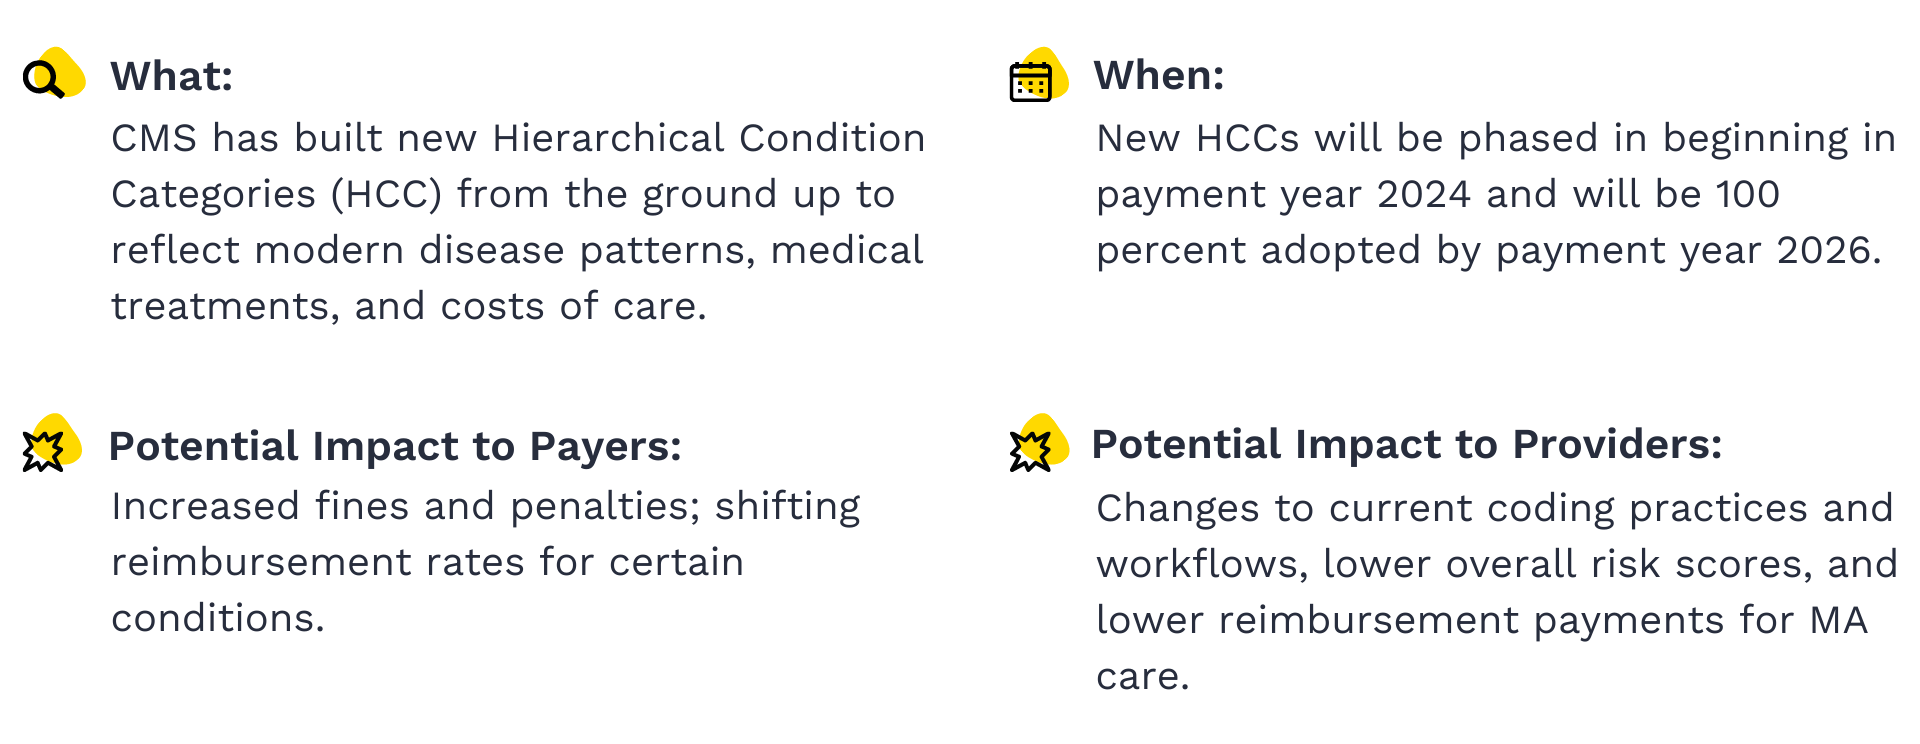 summary-of-the-changes-to-hierarchical-condition-categories